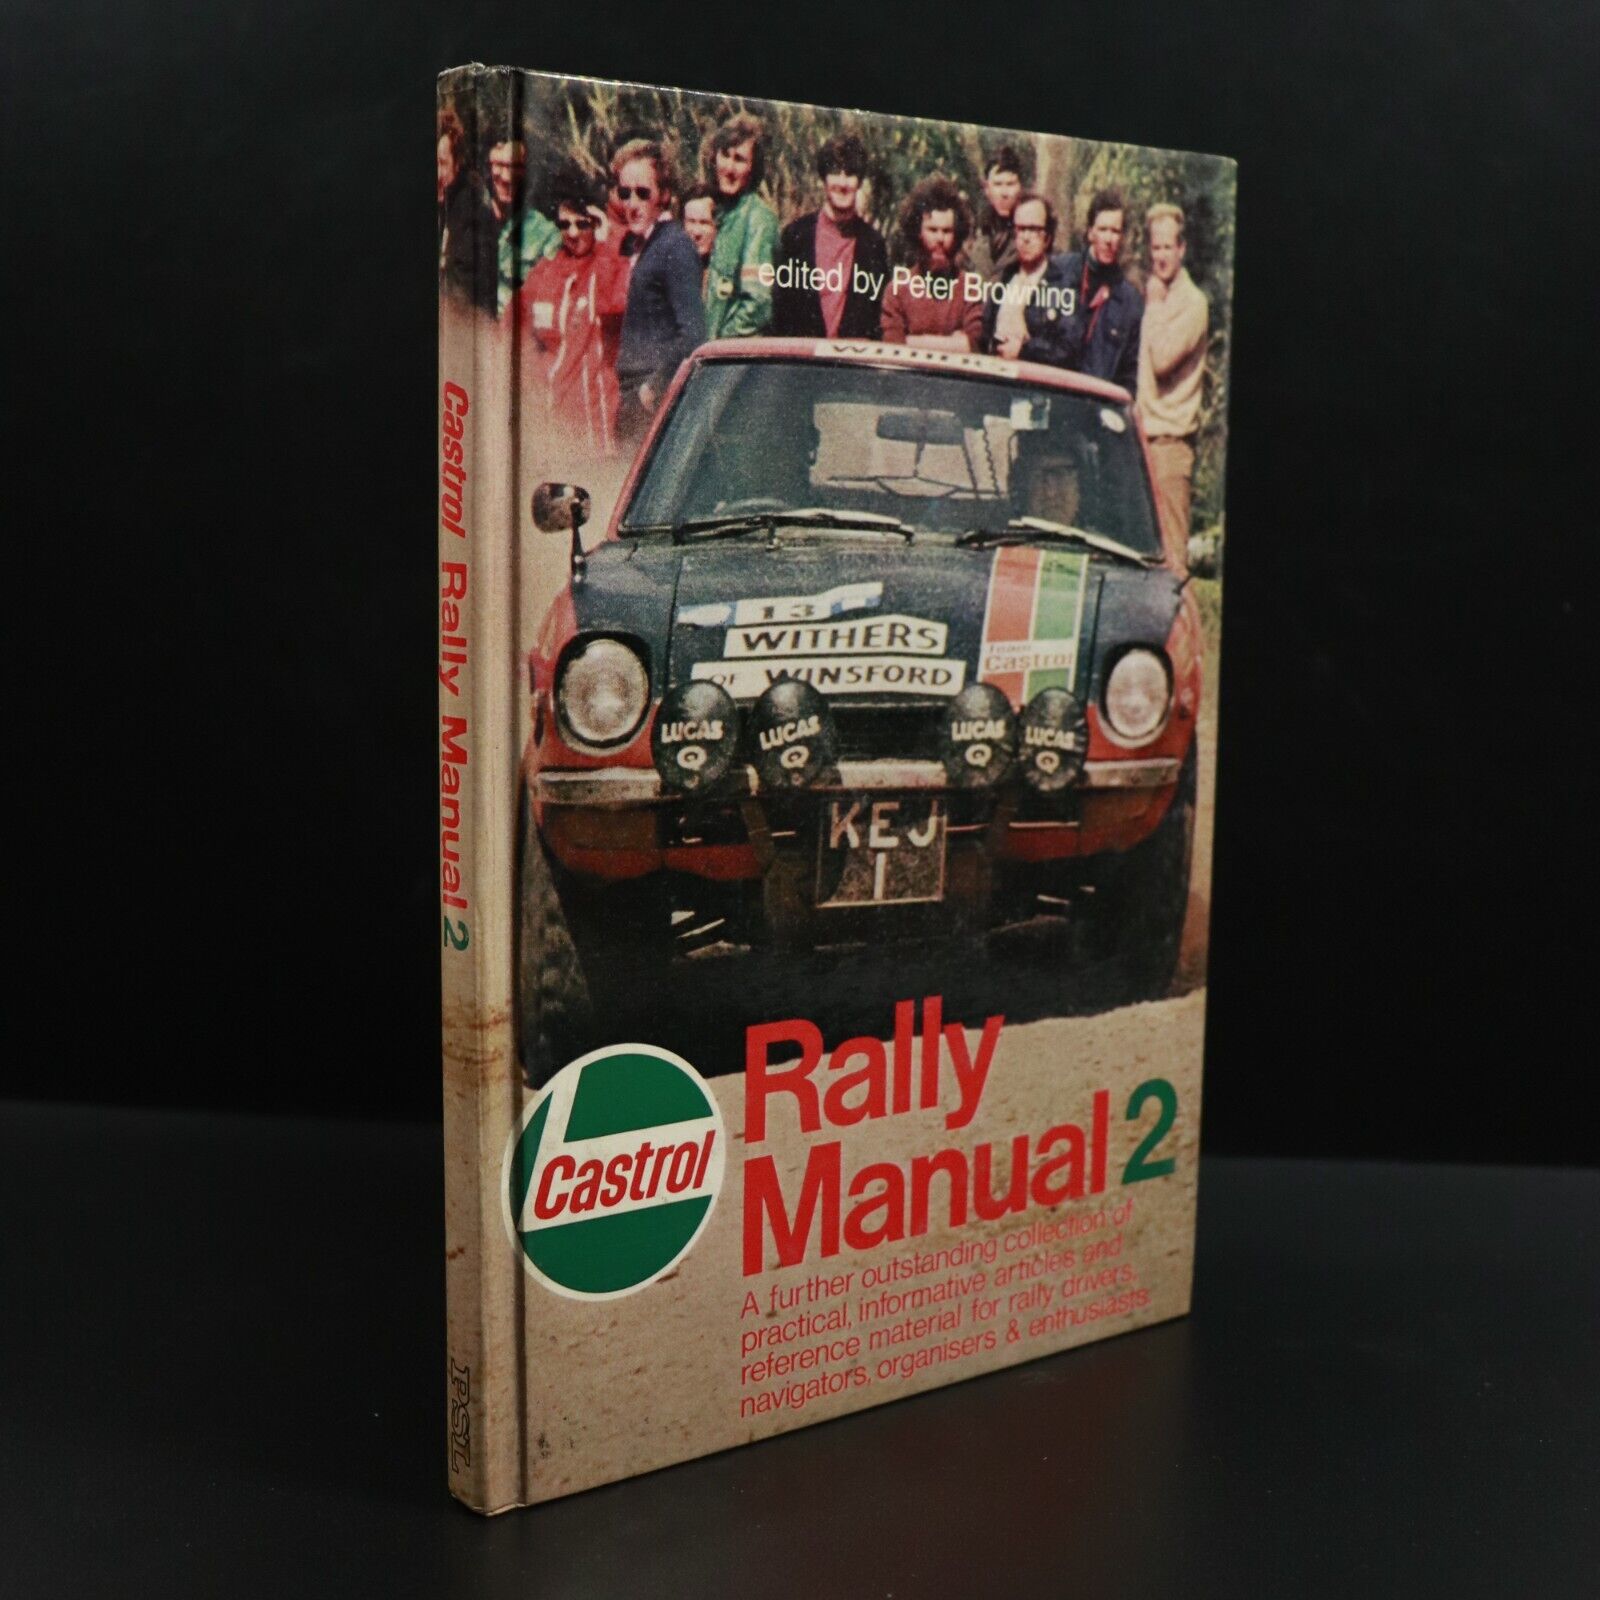 1972 Castrol Rally Manual 2 by Peter Browning Vintage Automotive Book Rally Cars